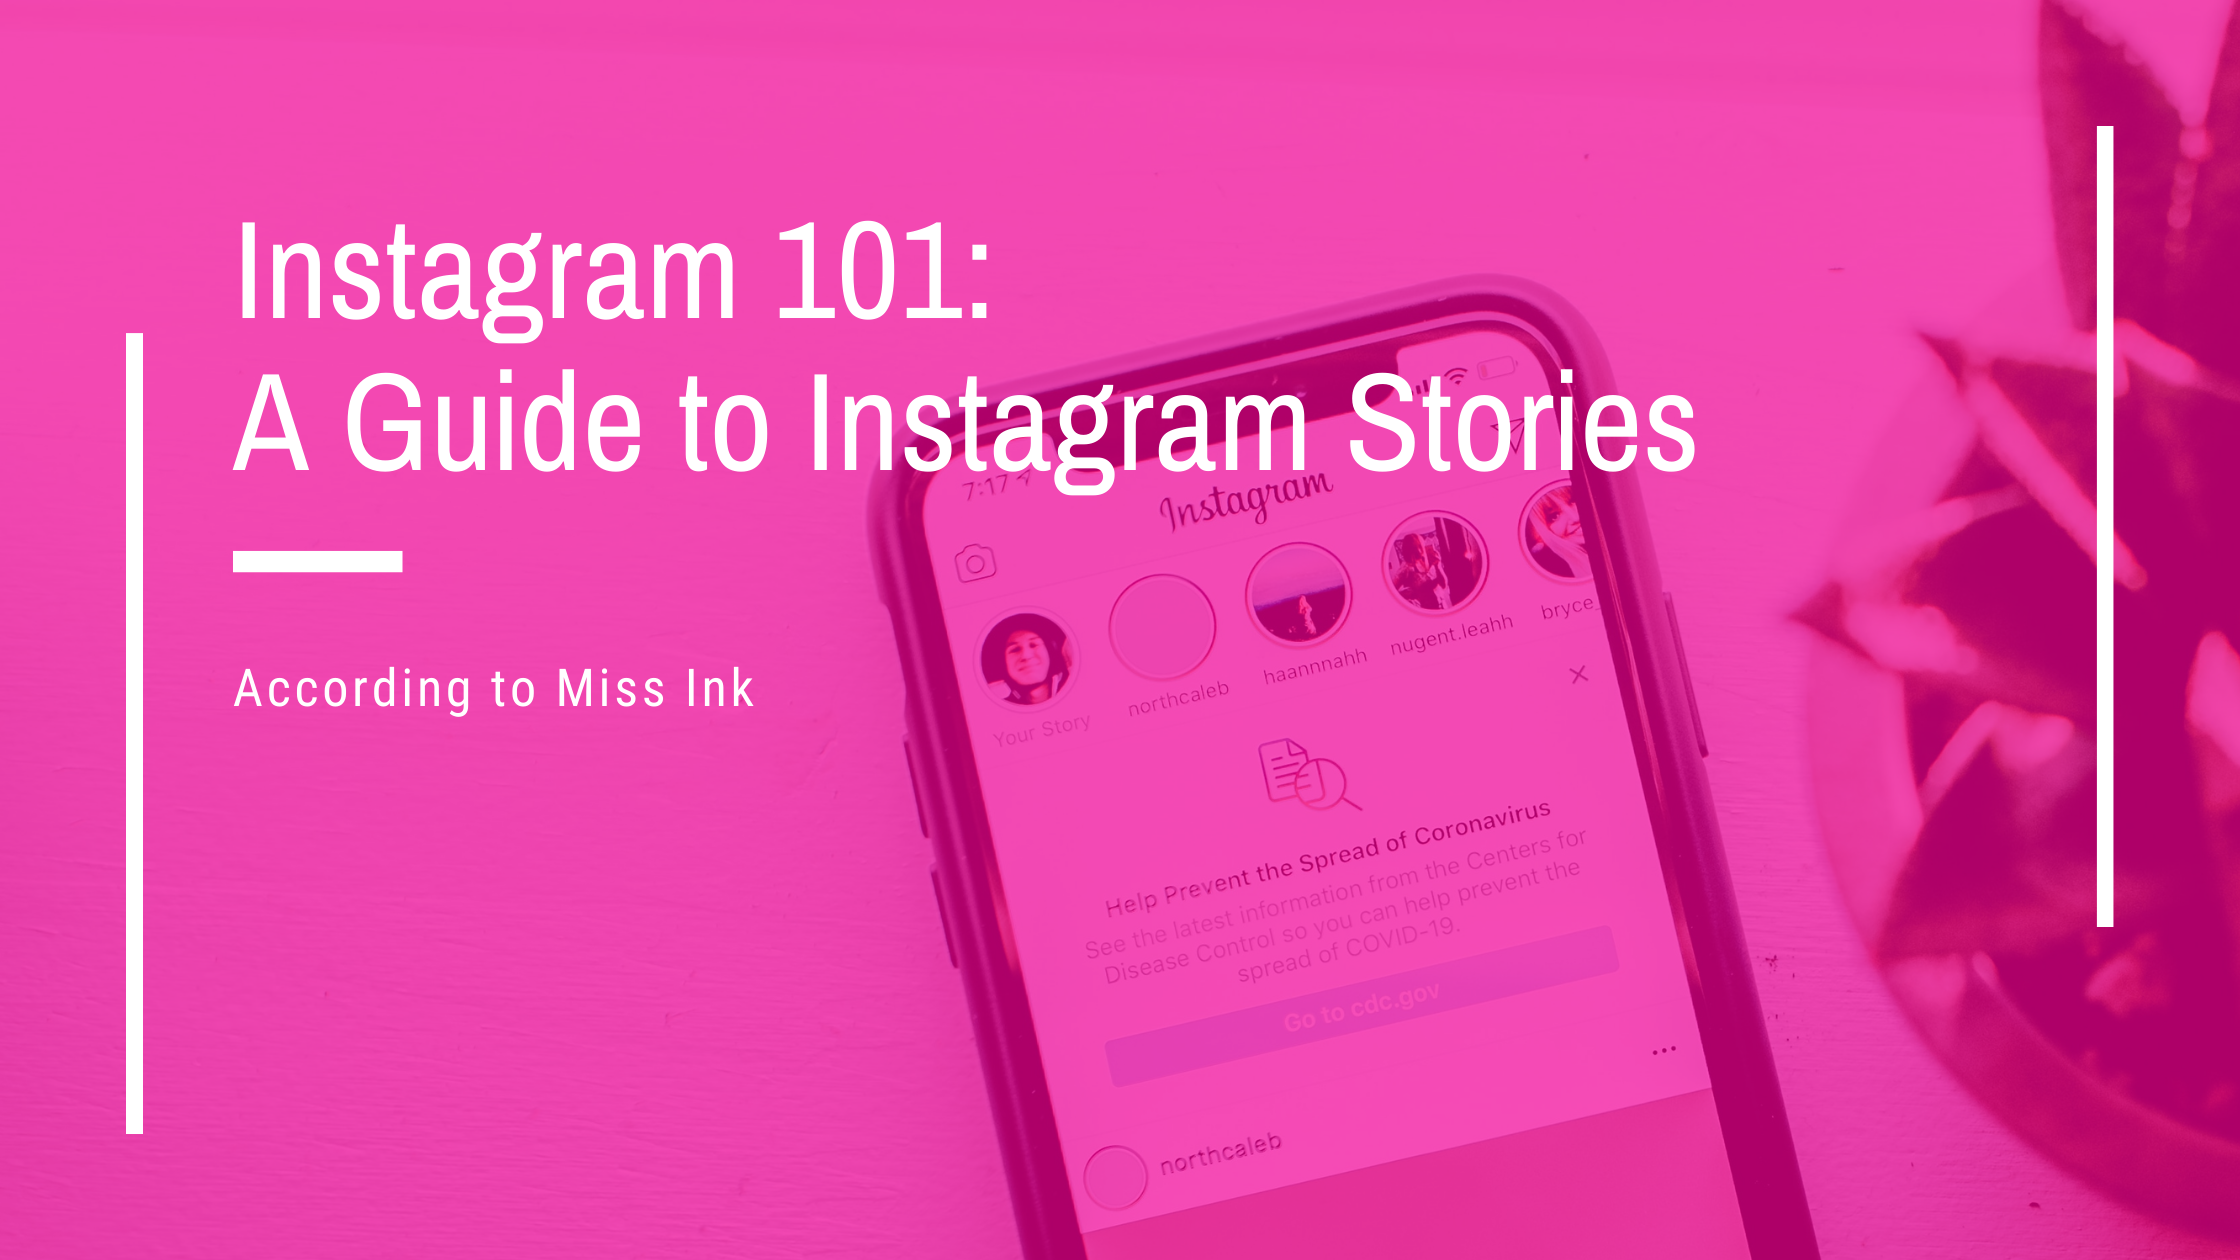 How to Use Instagram: A 101 Guide